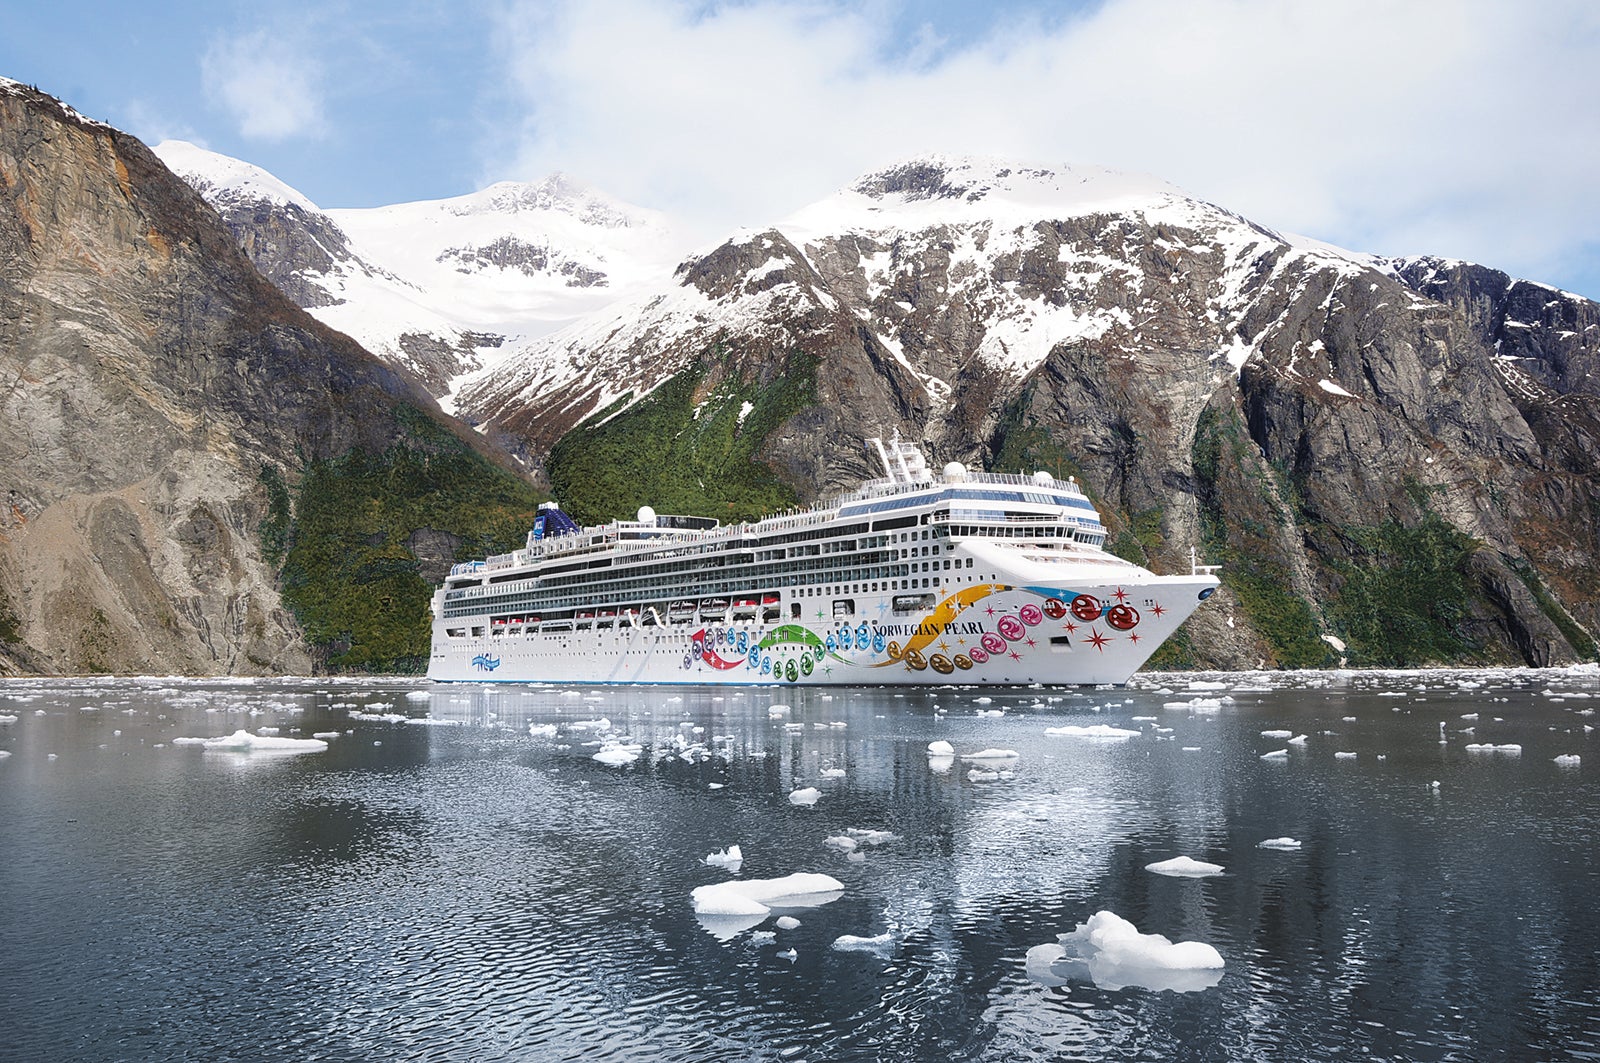 Cruise ship set against Alaska mountains with ice in the water